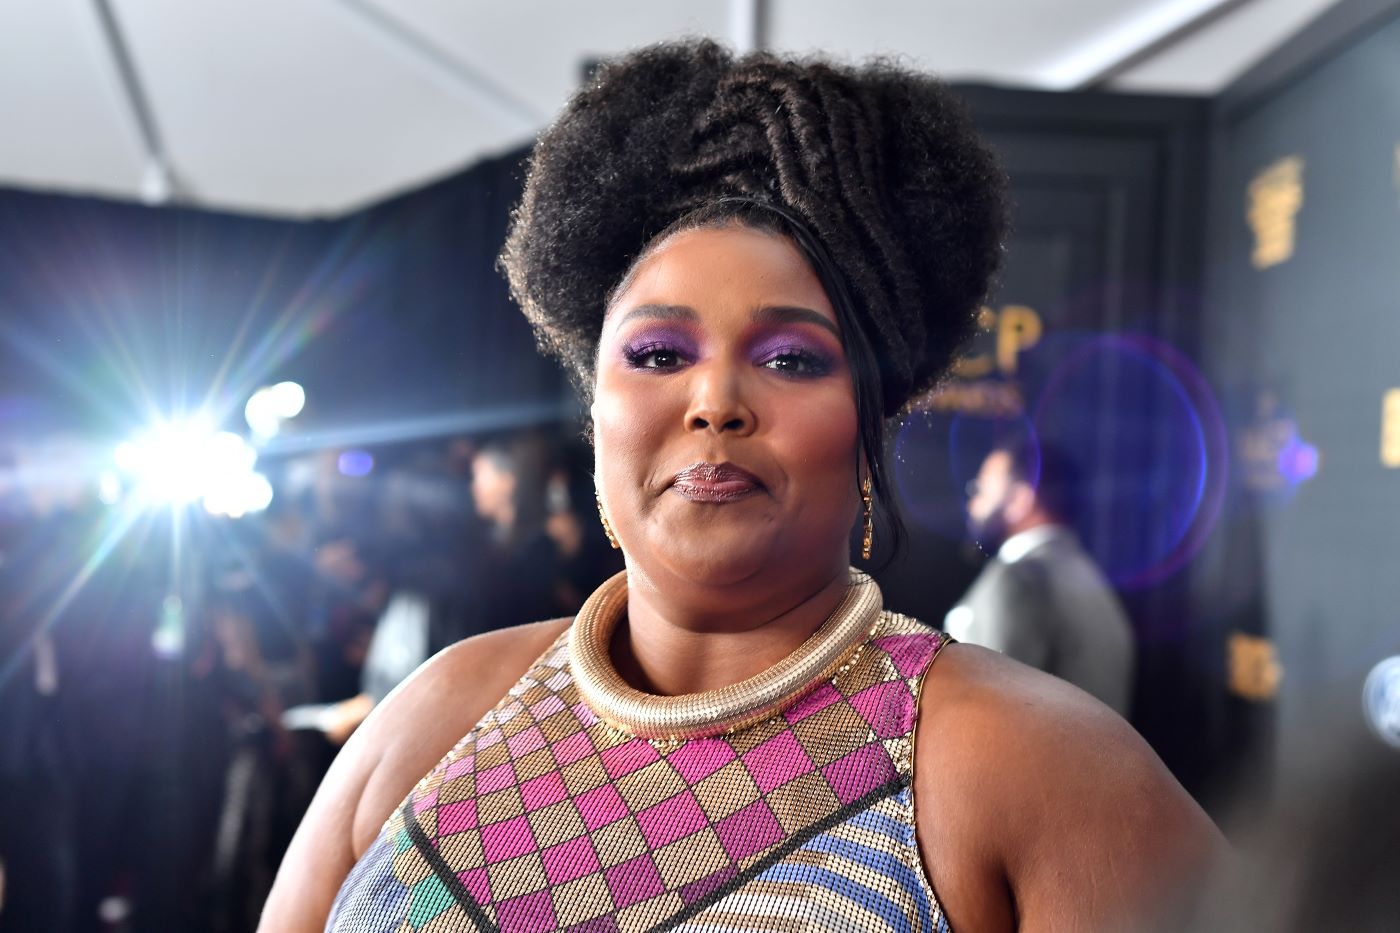 Lizzo Said It's 'Hard to Grasp' Her Impact On the World